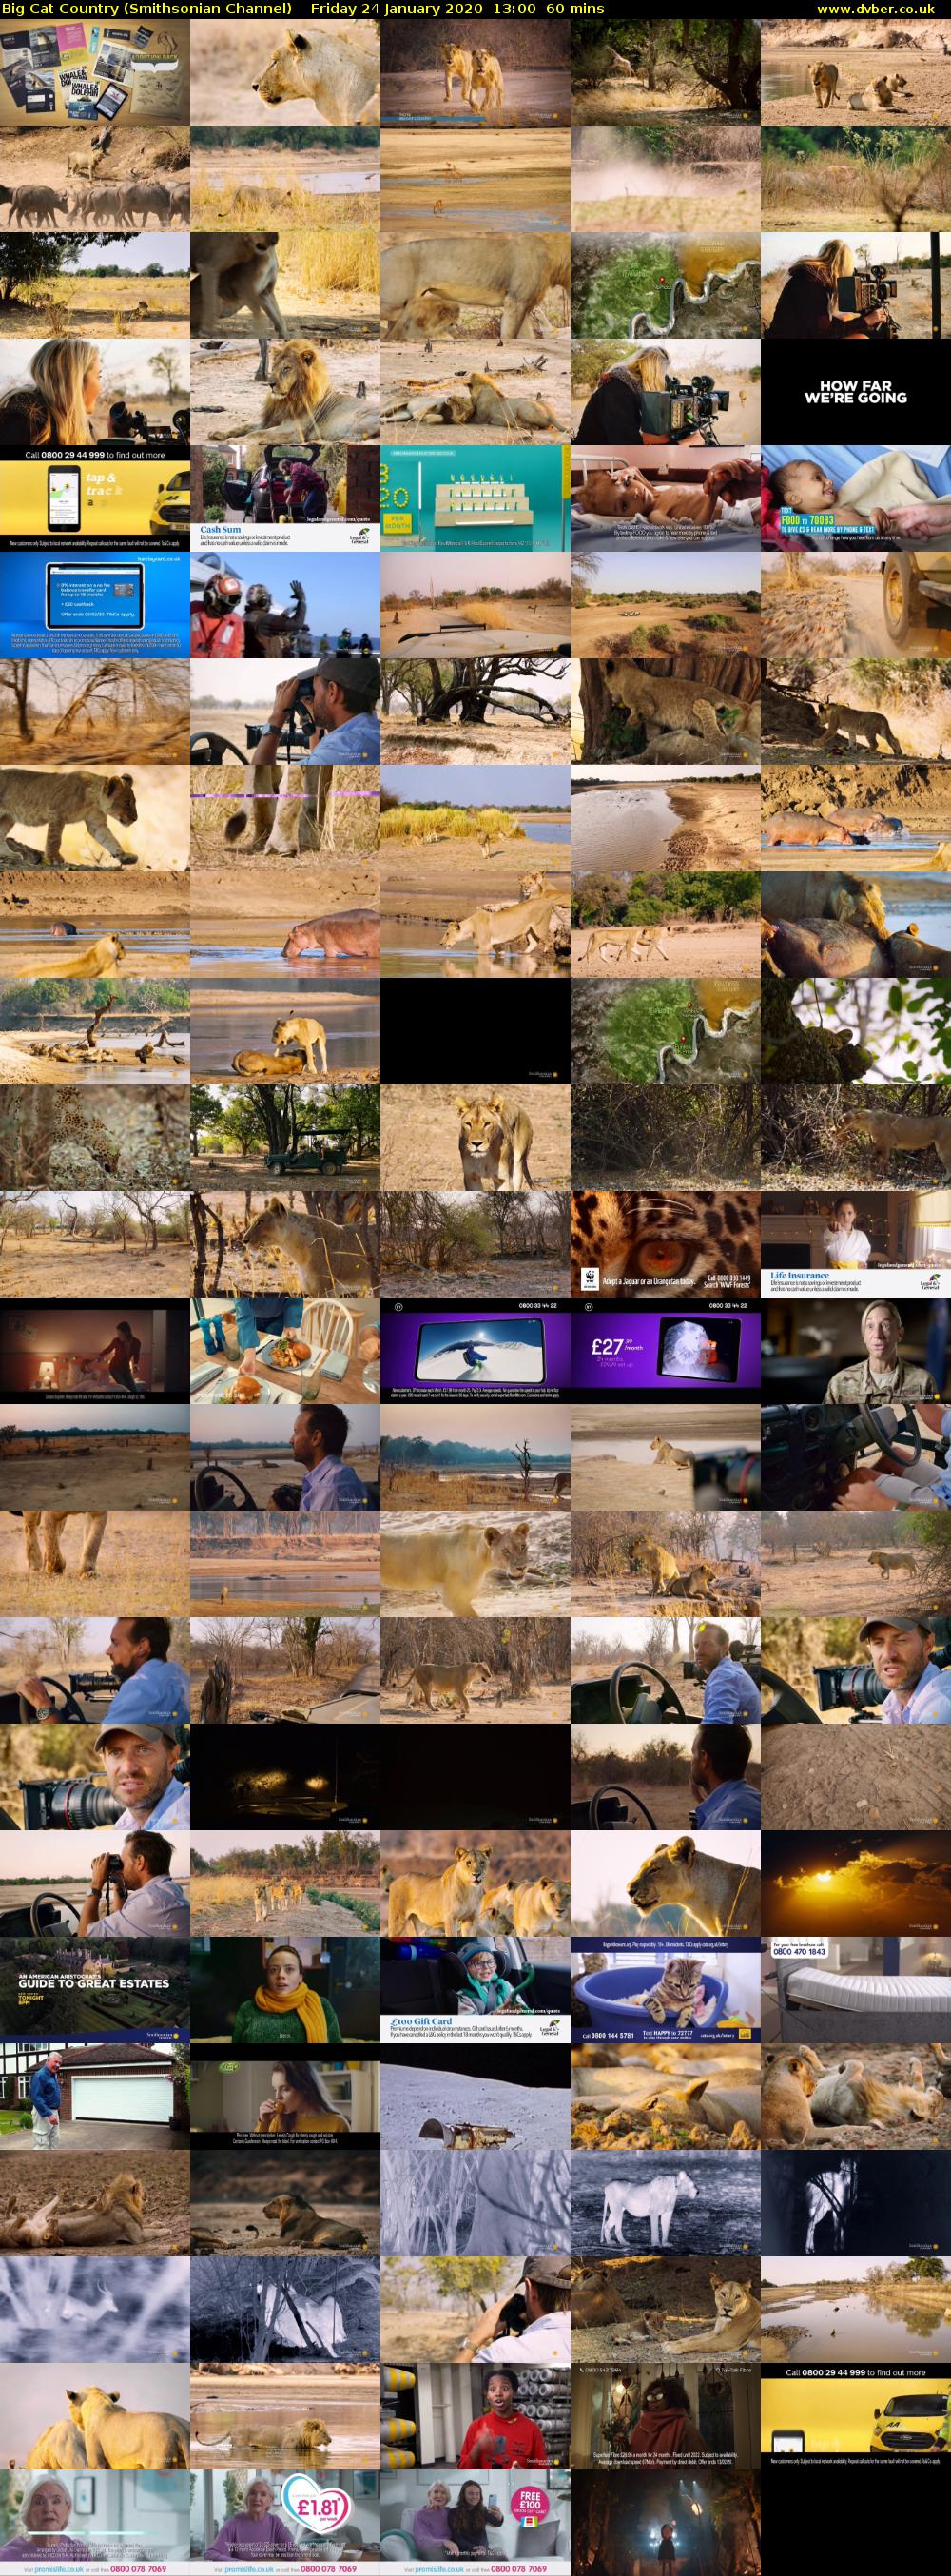 Big Cat Country (Smithsonian Channel) Friday 24 January 2020 13:00 - 14:00